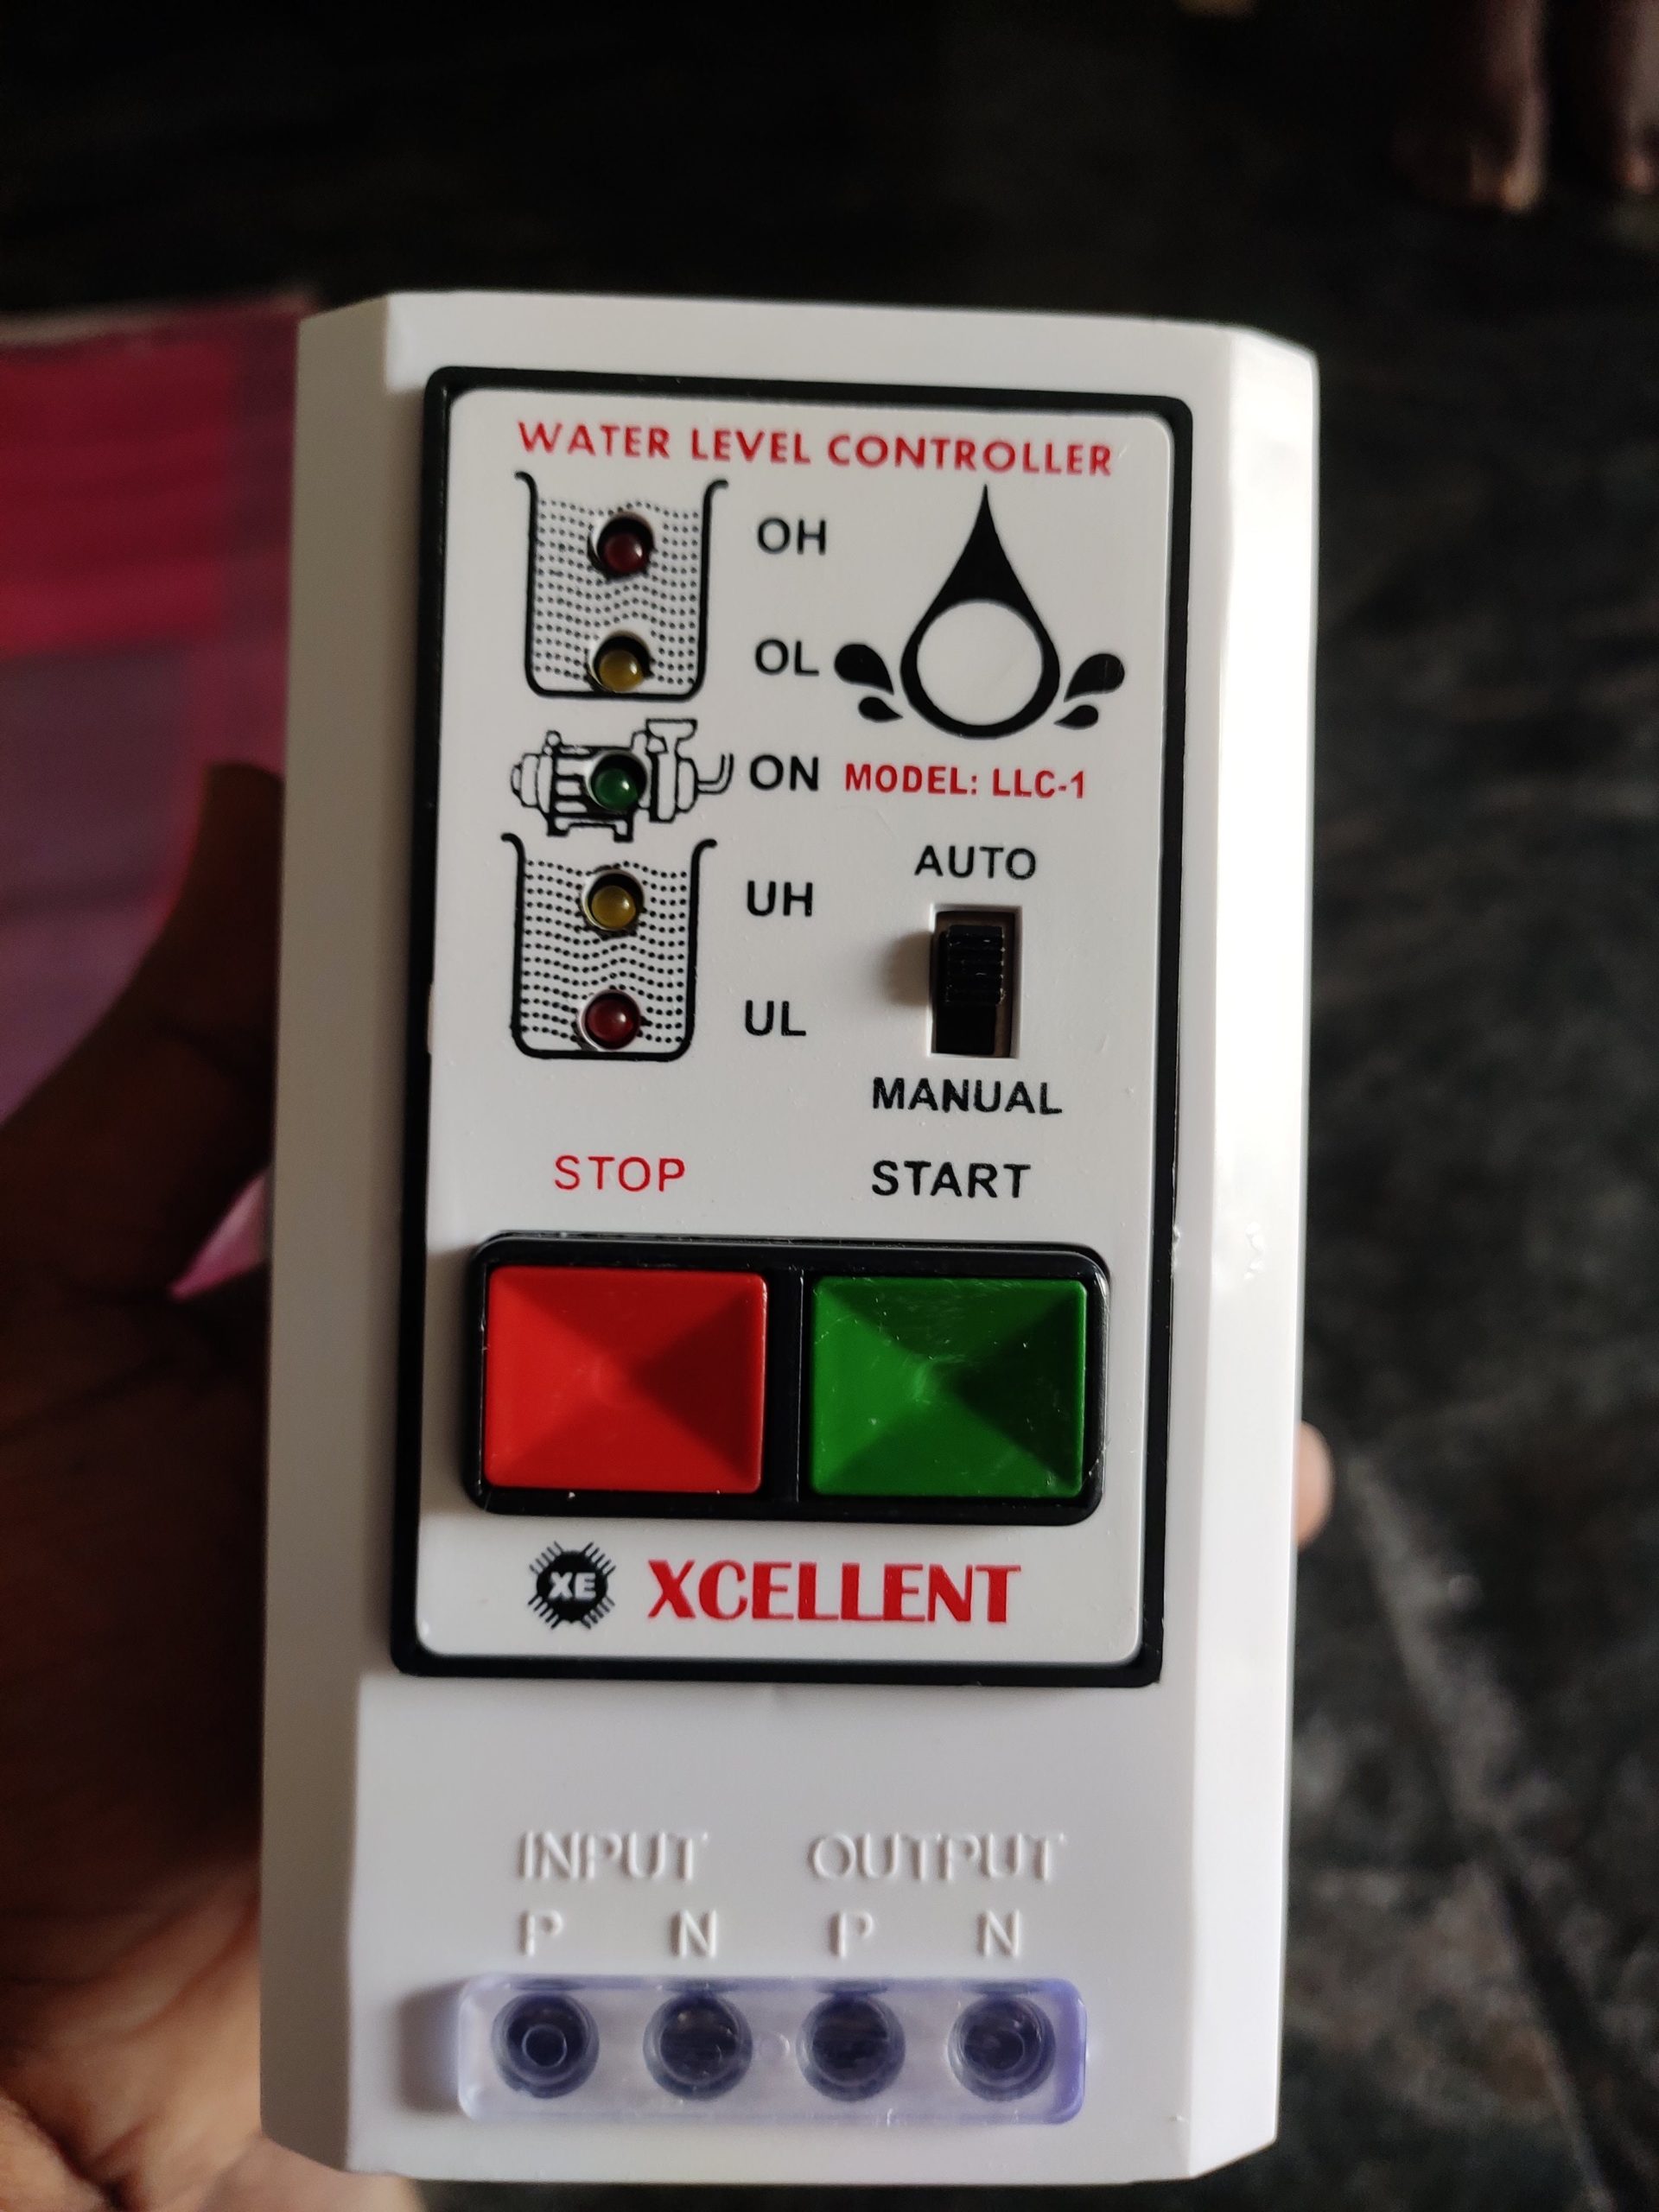 Water level controller unit with Auto and Manul mode